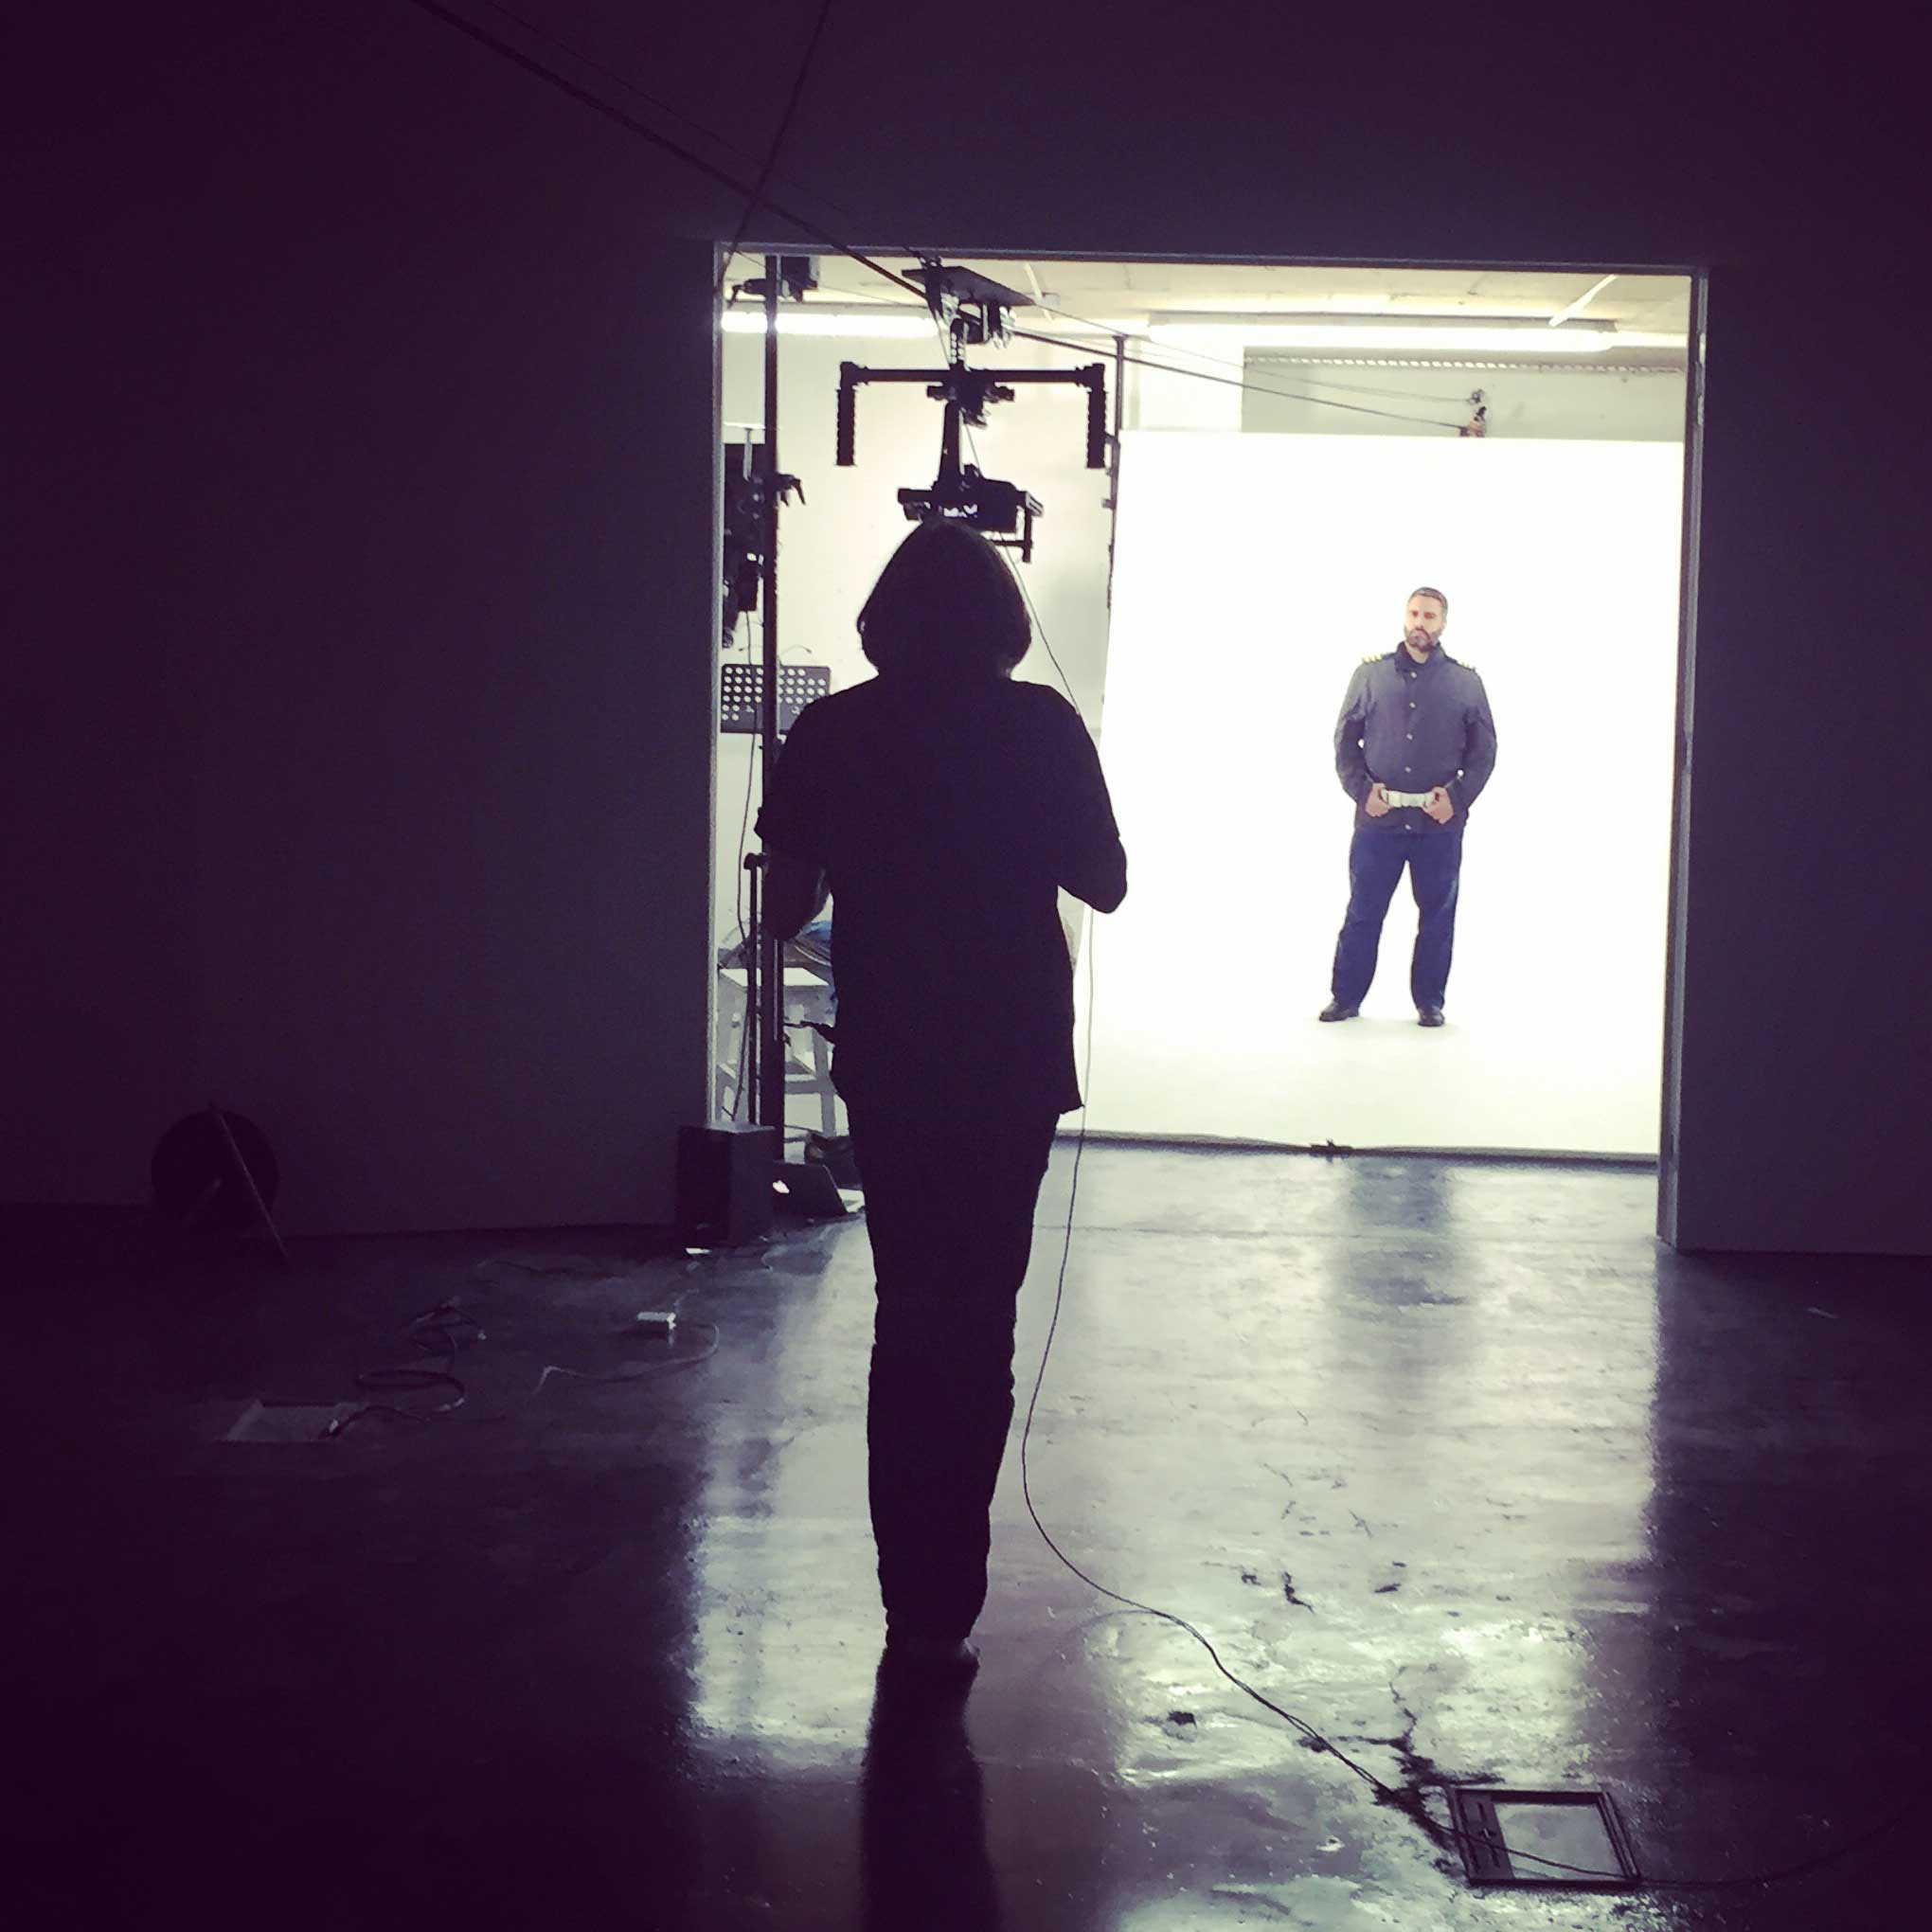 Production image of Mirror II by David Cotterrell - A man is standing in front of a white screen recording for the piece. David Cotterrell is in the foreground.